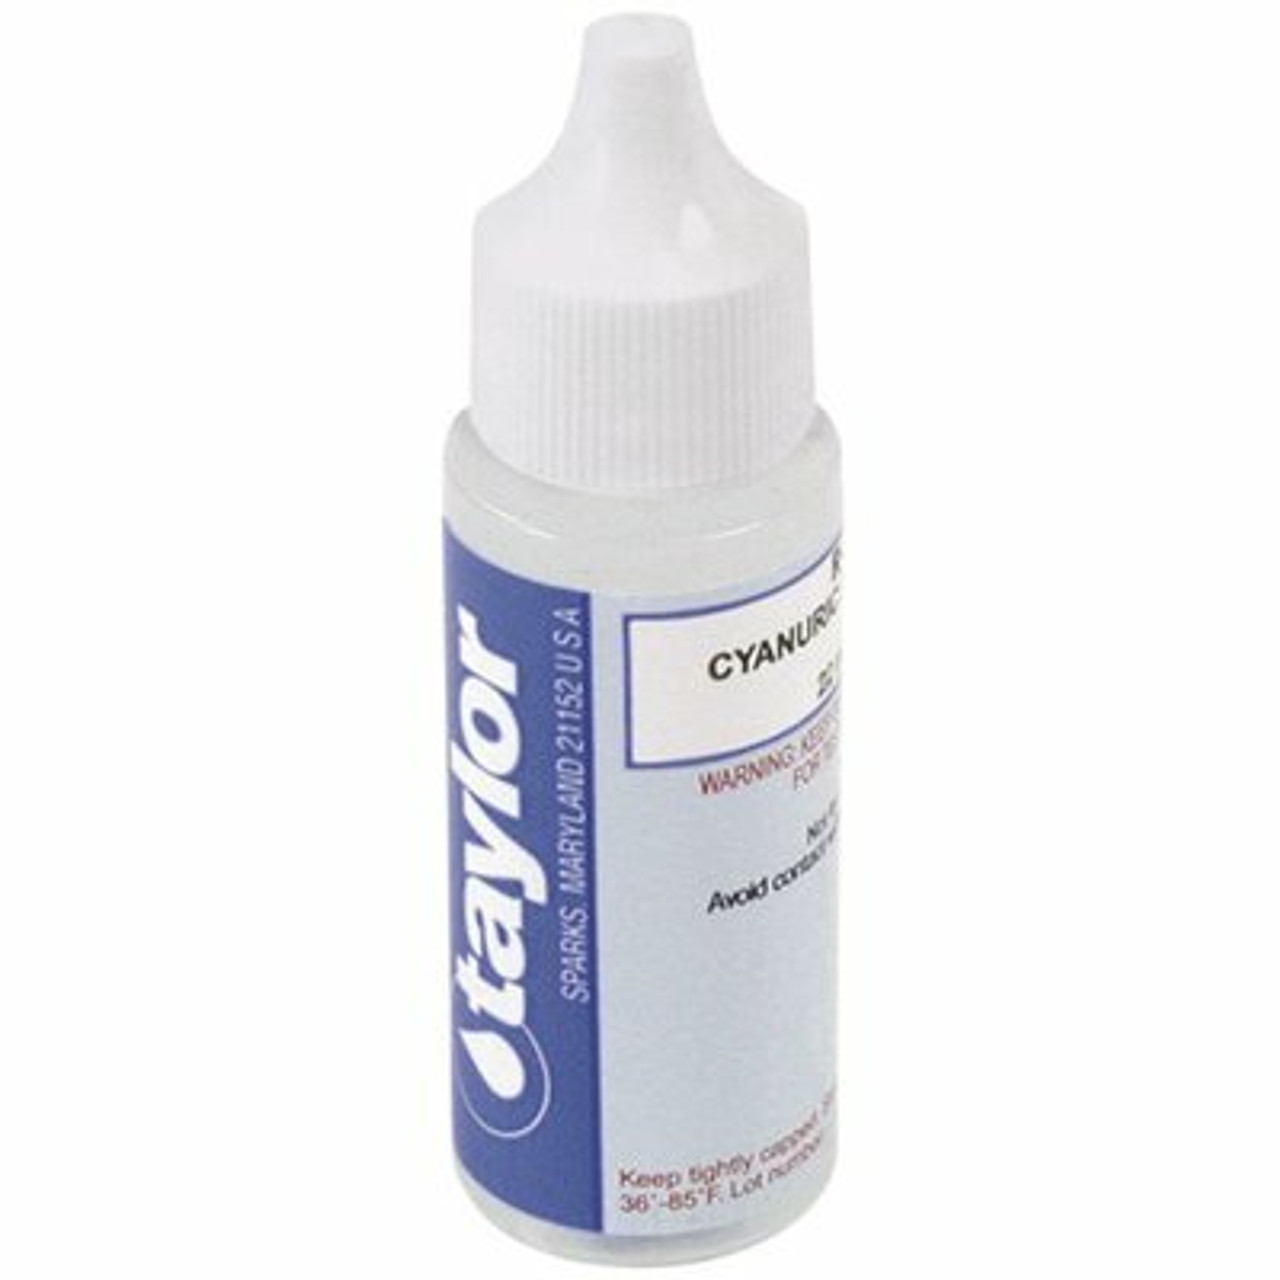 Taylor 3/4 Oz. Test Kit Replacement Reagent Refill Bottles Cyanuric Acid Reagent